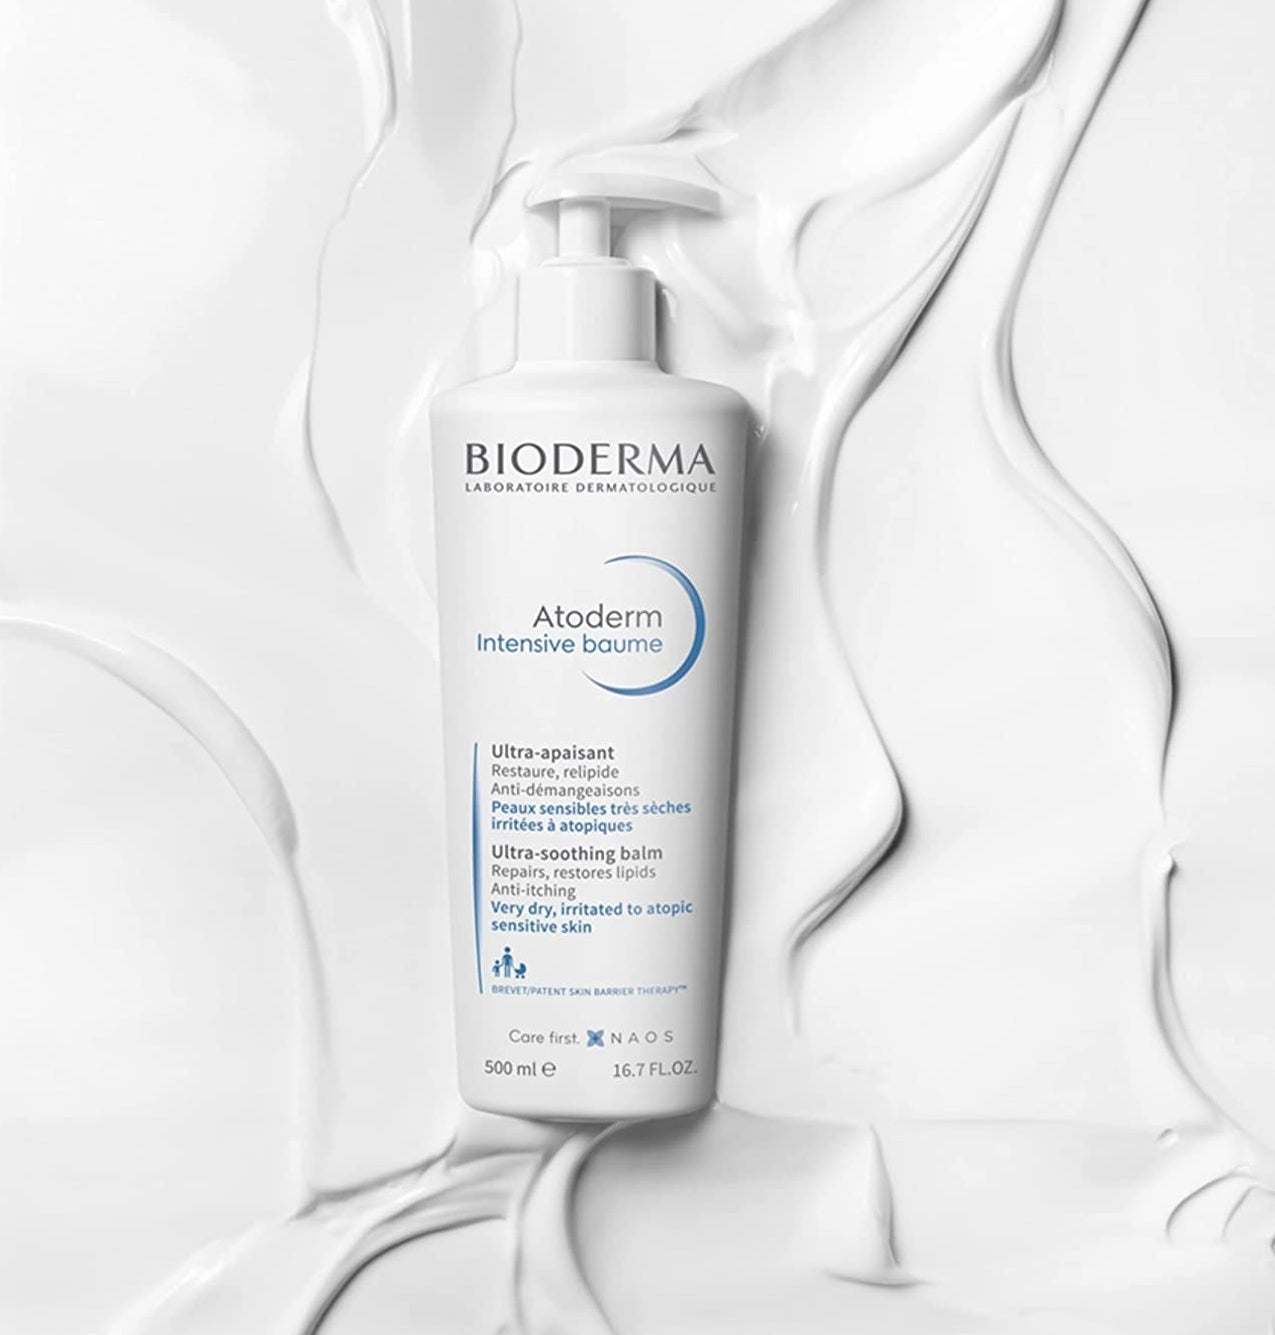 a bottle of the bioderma soothing body lotion on a simple background